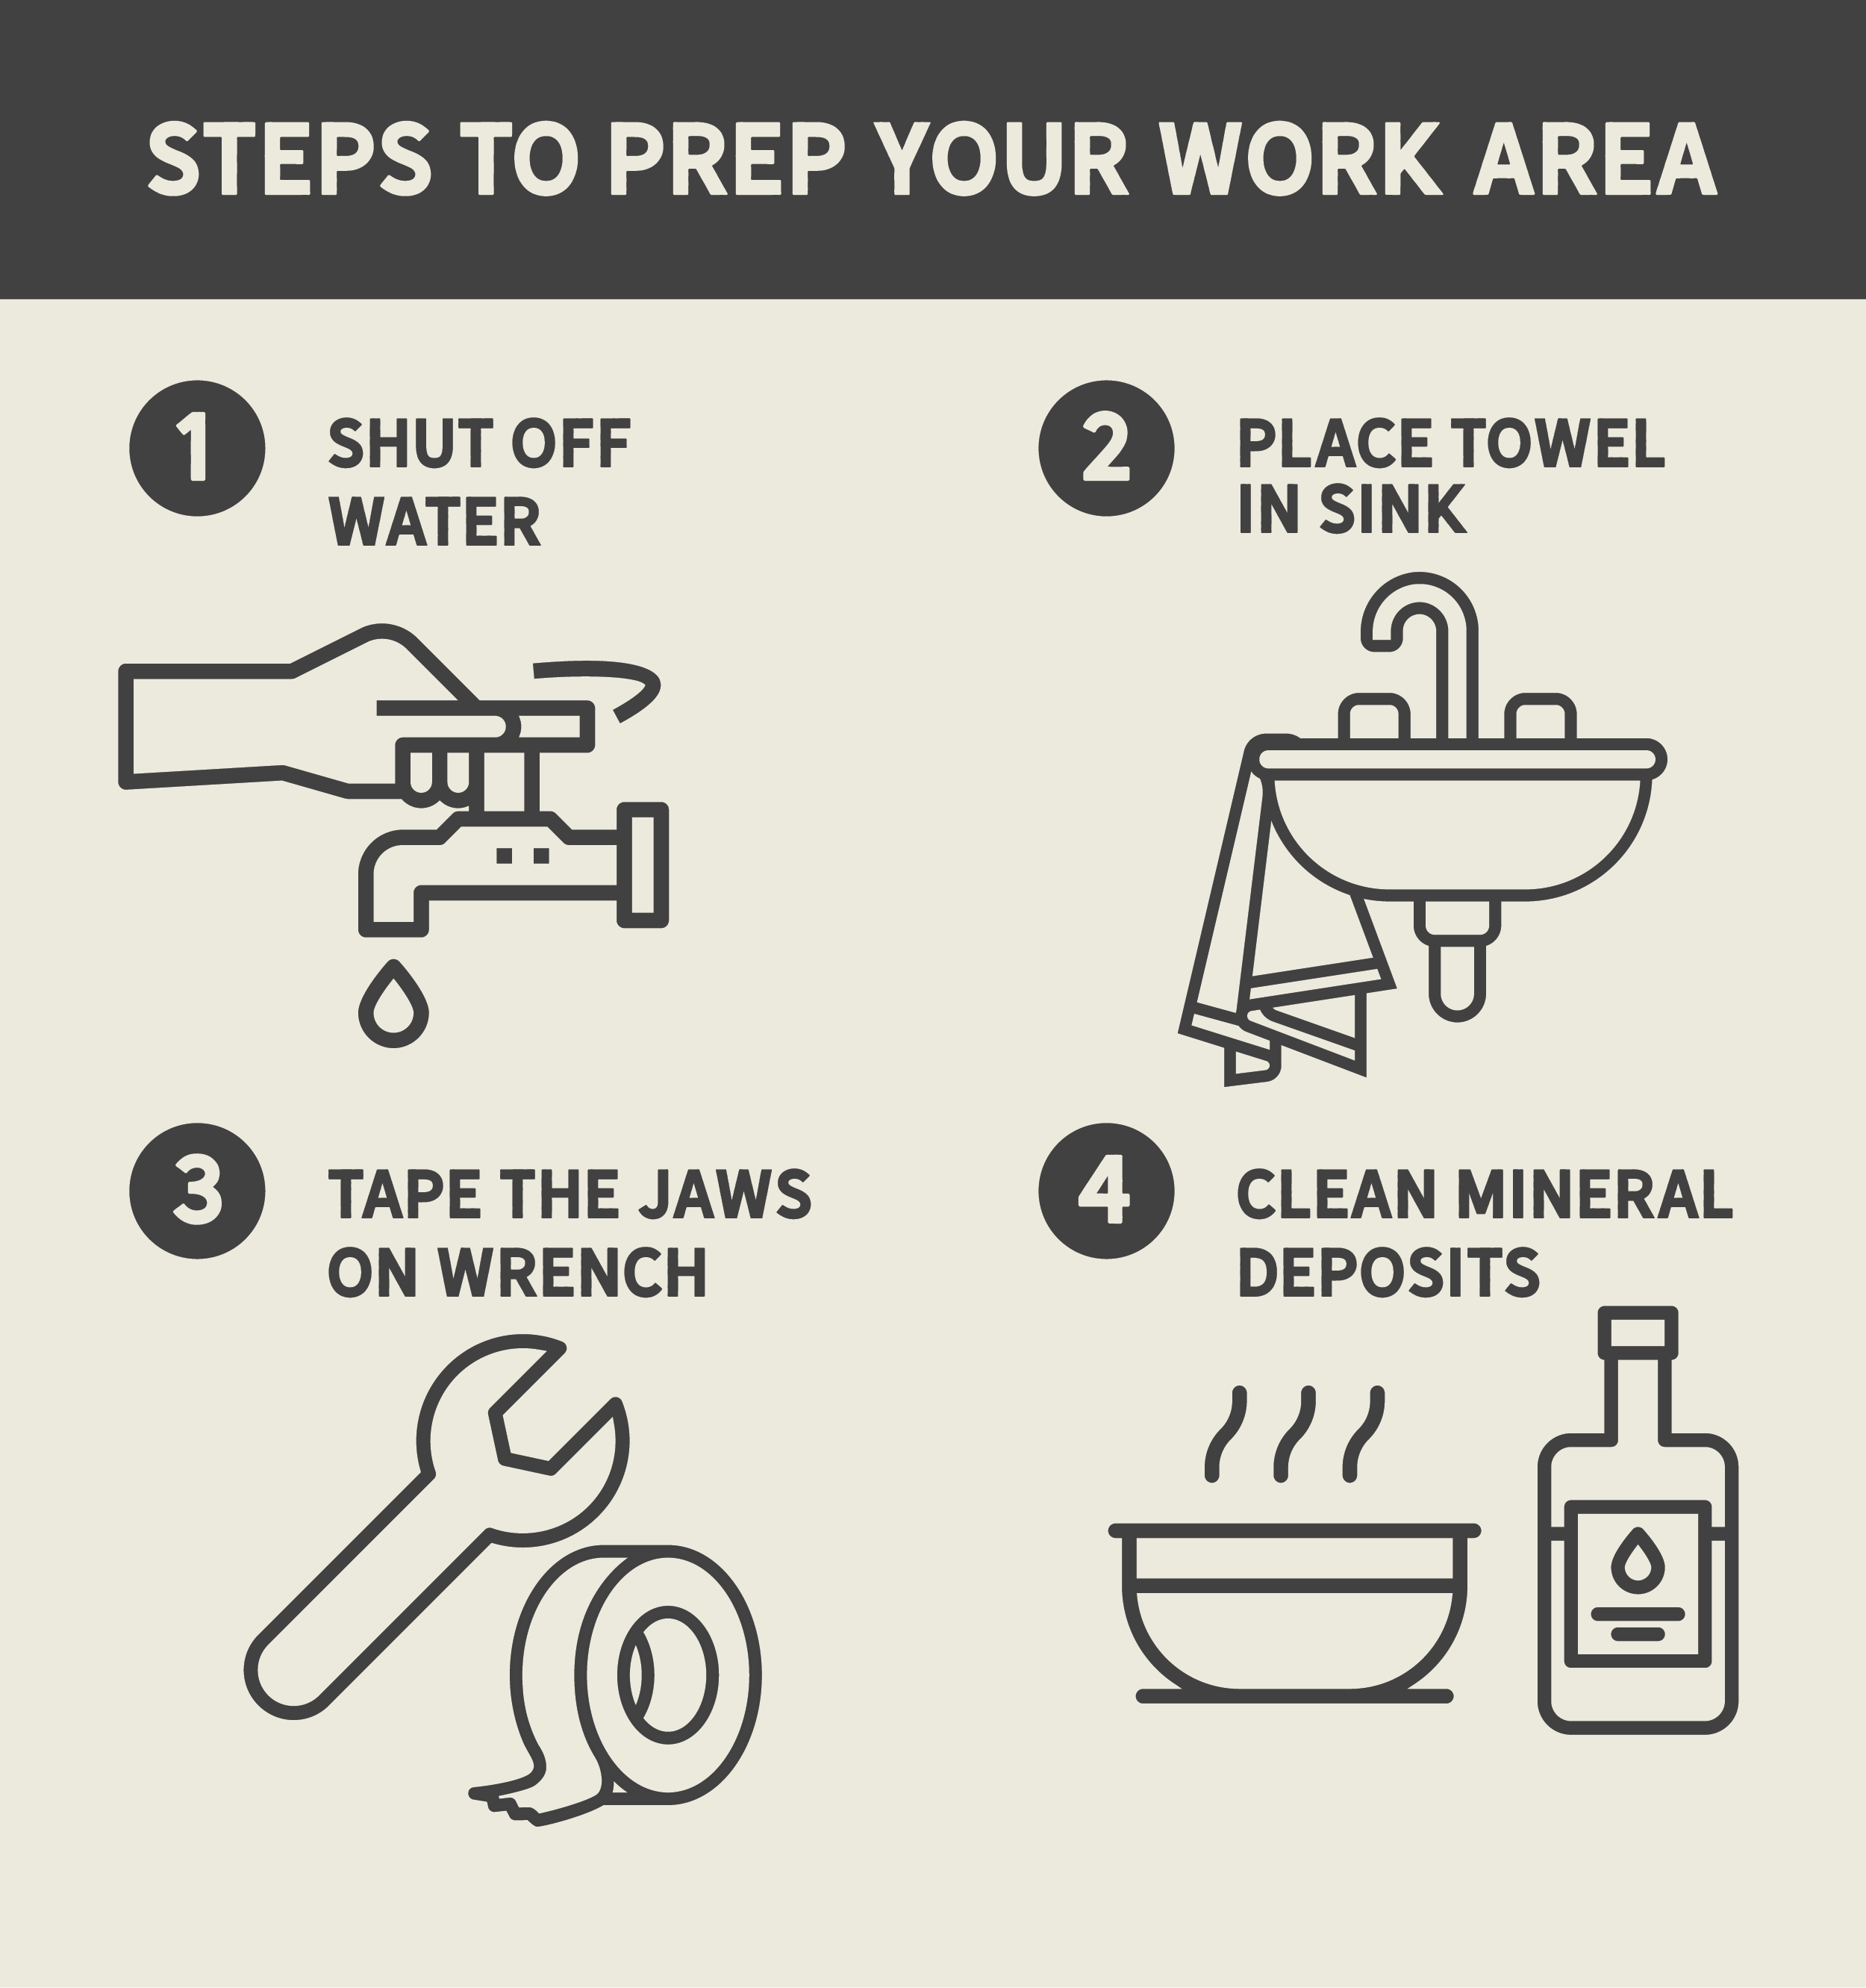 Steps to Prep Your Work Area